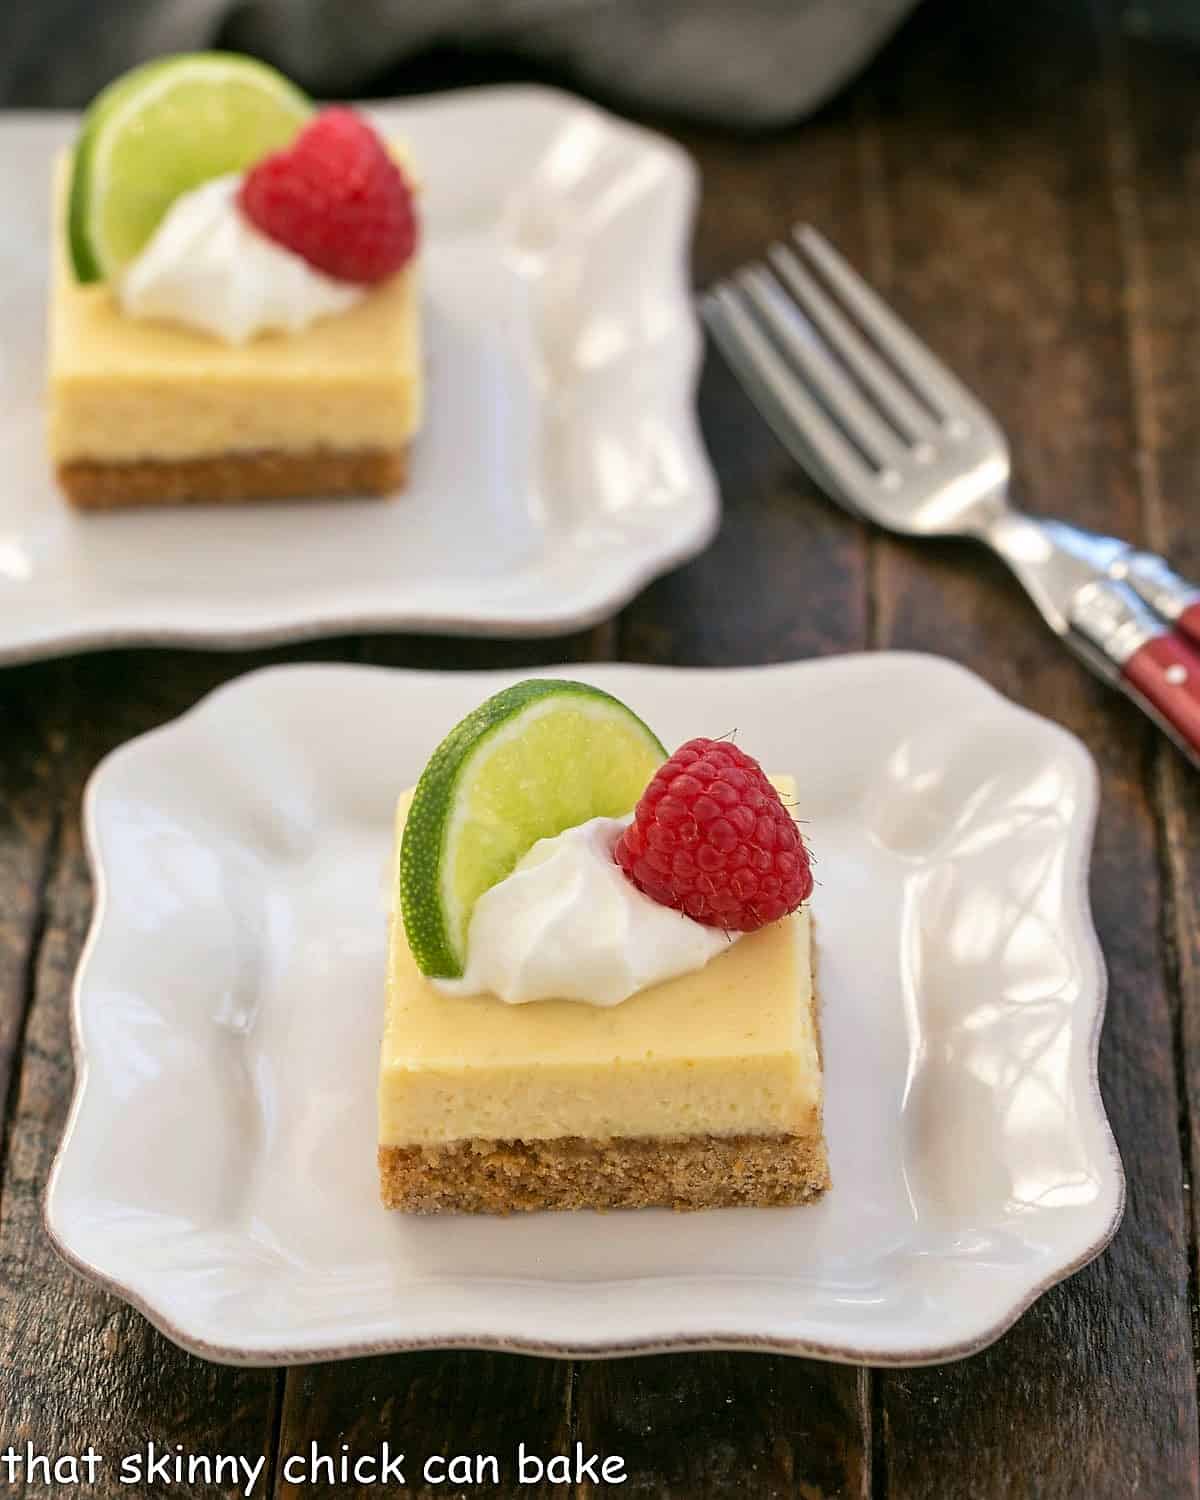 2 key lime pie bars on white plates with red handle forks.